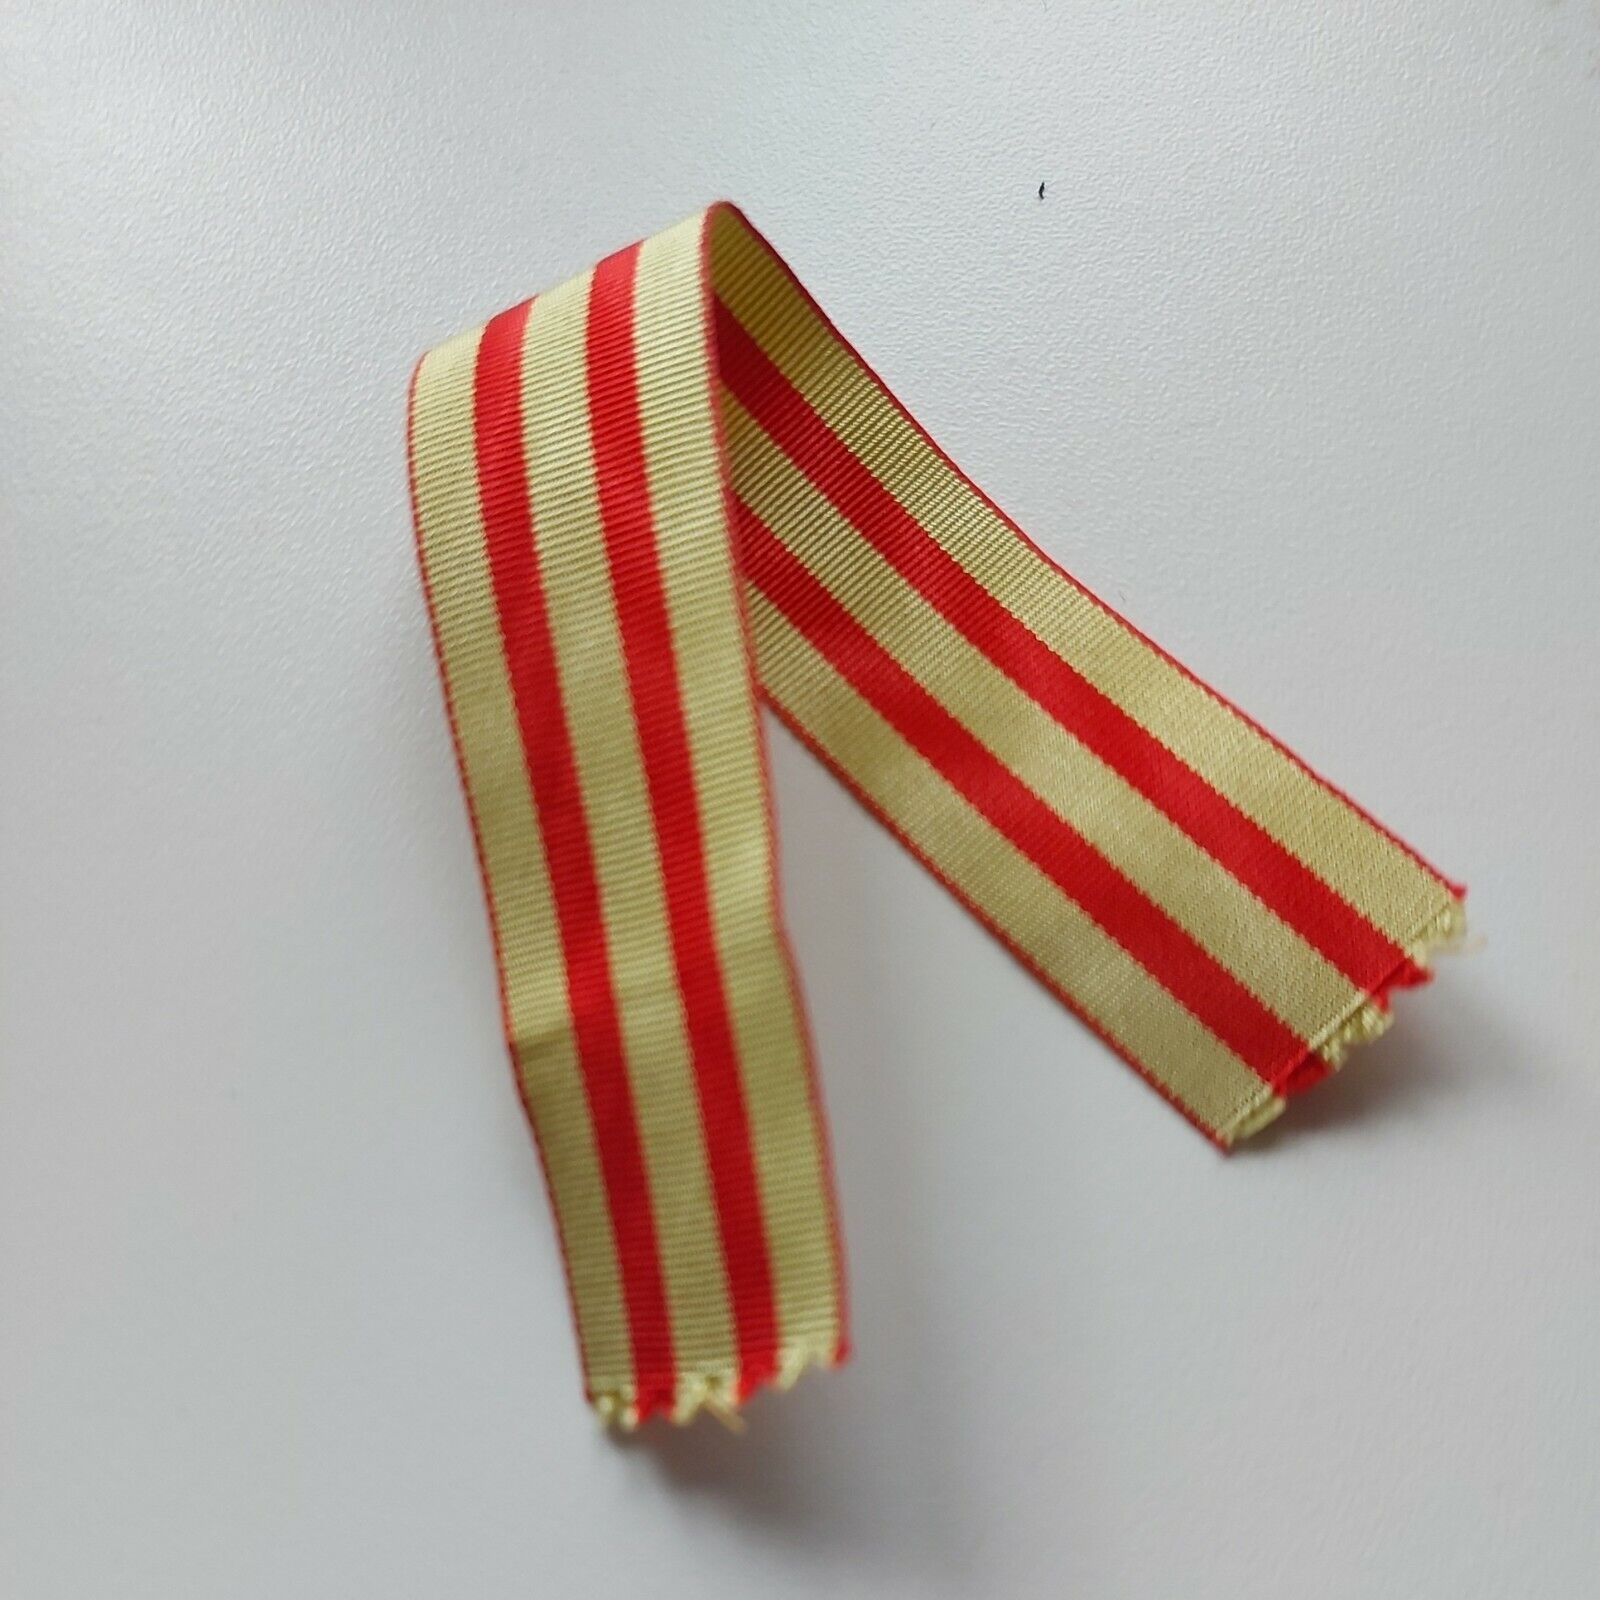 Soviet Awards WW2 Ribbon for Medal Defense of Moscow #142